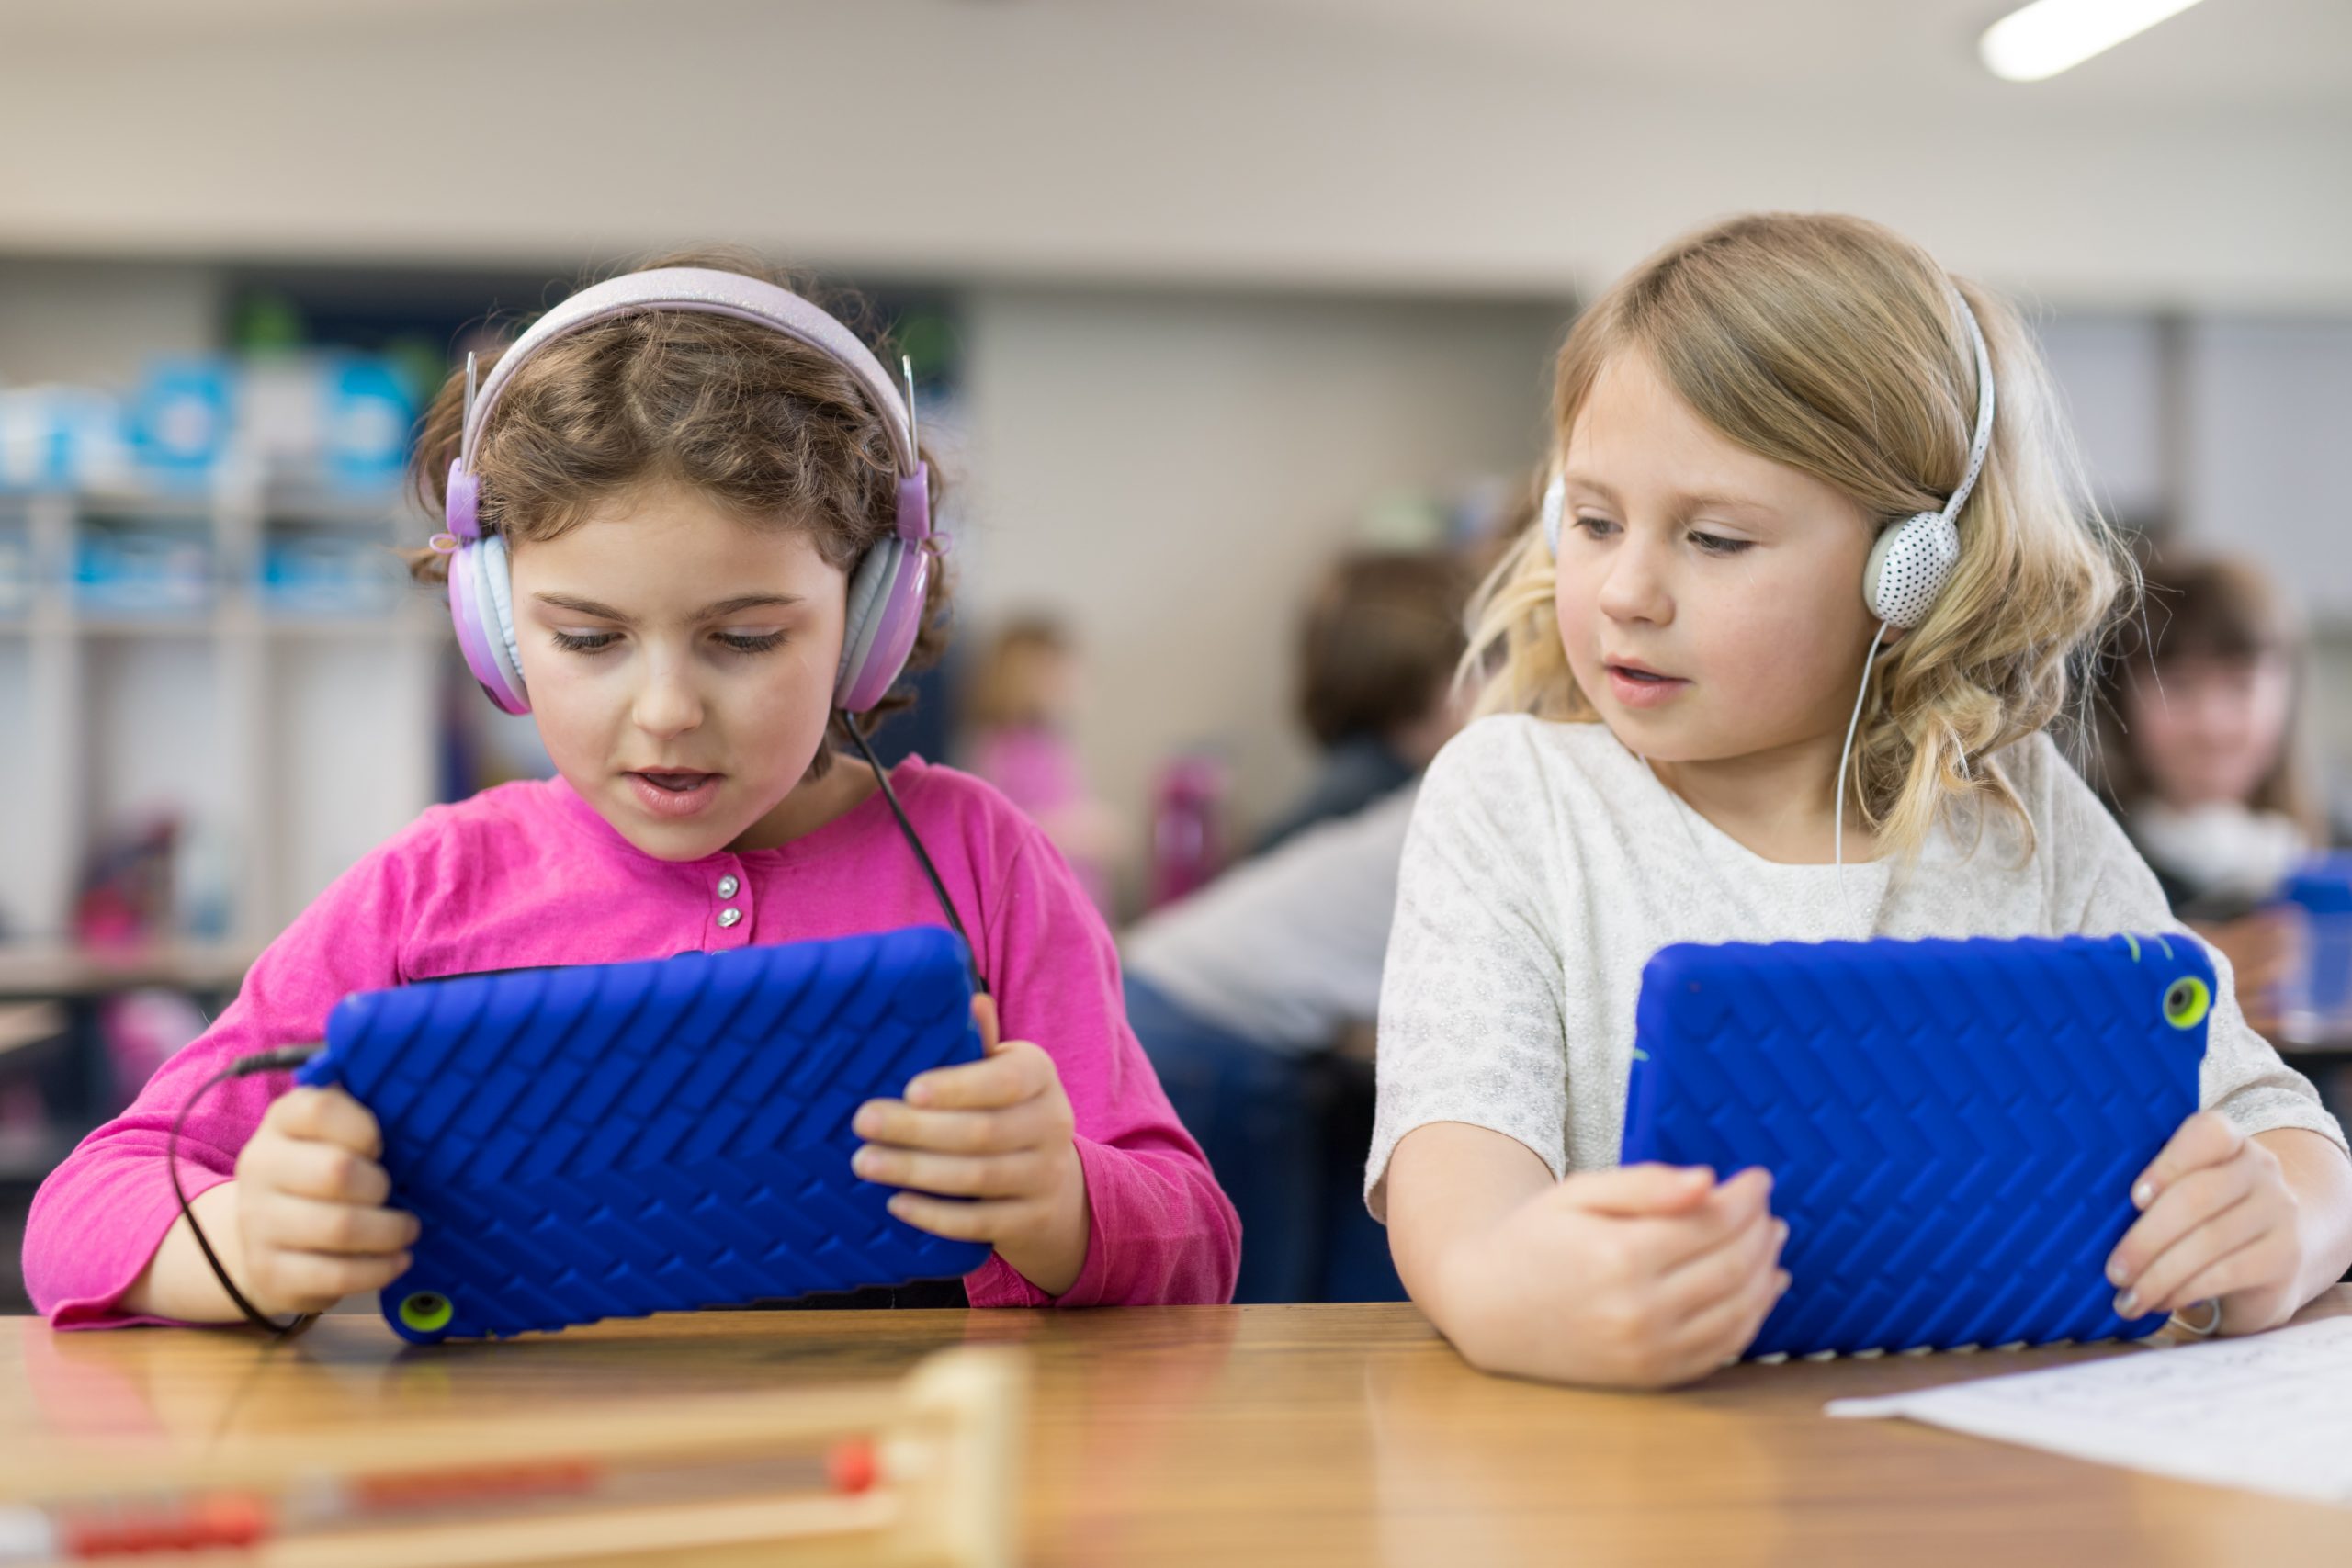 Live Phonics Classes vs Pre-Recorded Lessons: Which is better & why?